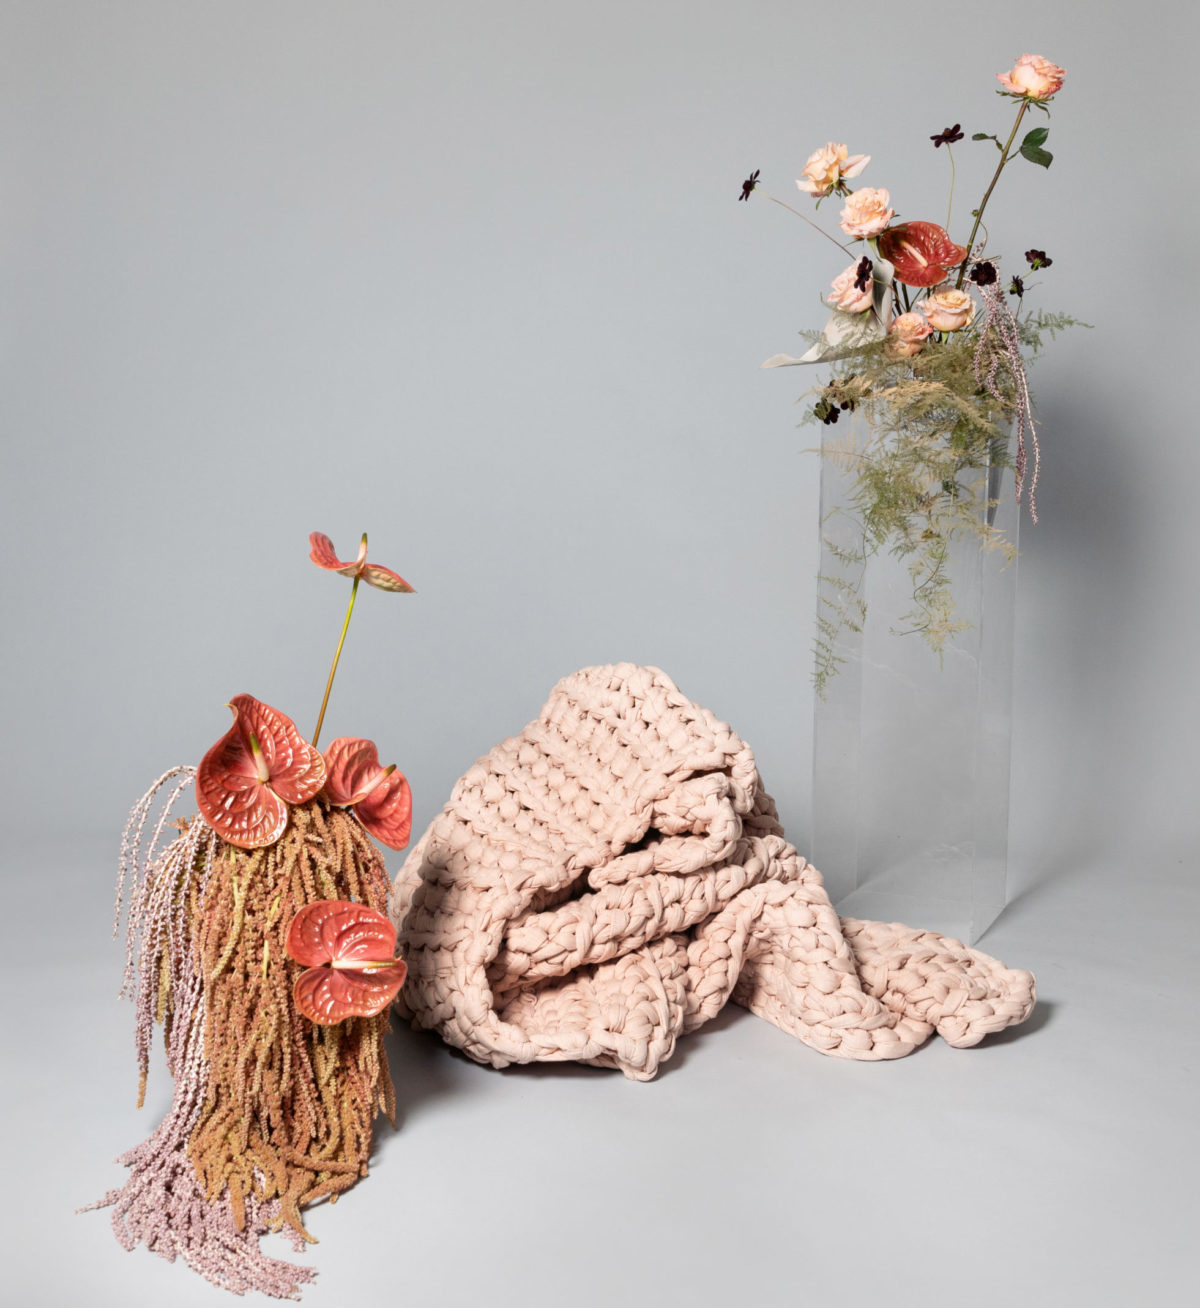 A blanket folded on the floor by flowers